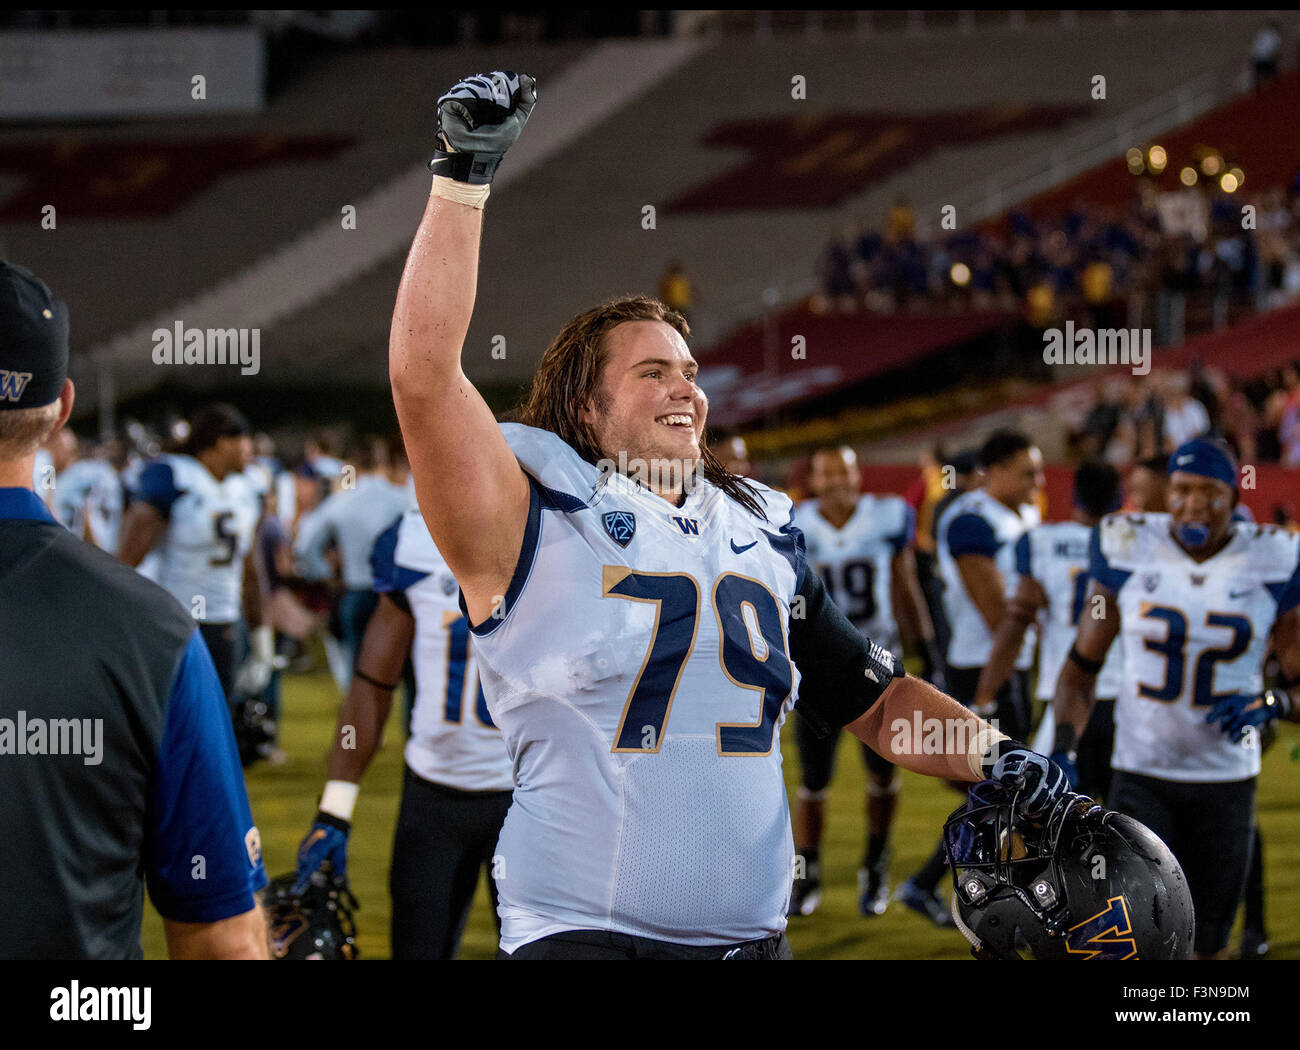 Los Angeles, CA, USA. 08th Oct, 2015. Washington Huskies offensive lineman (79) Coleman Shelton celebrates after a game between the Washington Huskies and the USC Trojans at the Los Angeles Memorial Coliseum in Los Angeles, California. USC was defeated the Washington 17-12.(Mandatory Credit: Juan Lainez/MarinMedia/Cal Sport Media) © csm/Alamy Live News Stock Photo